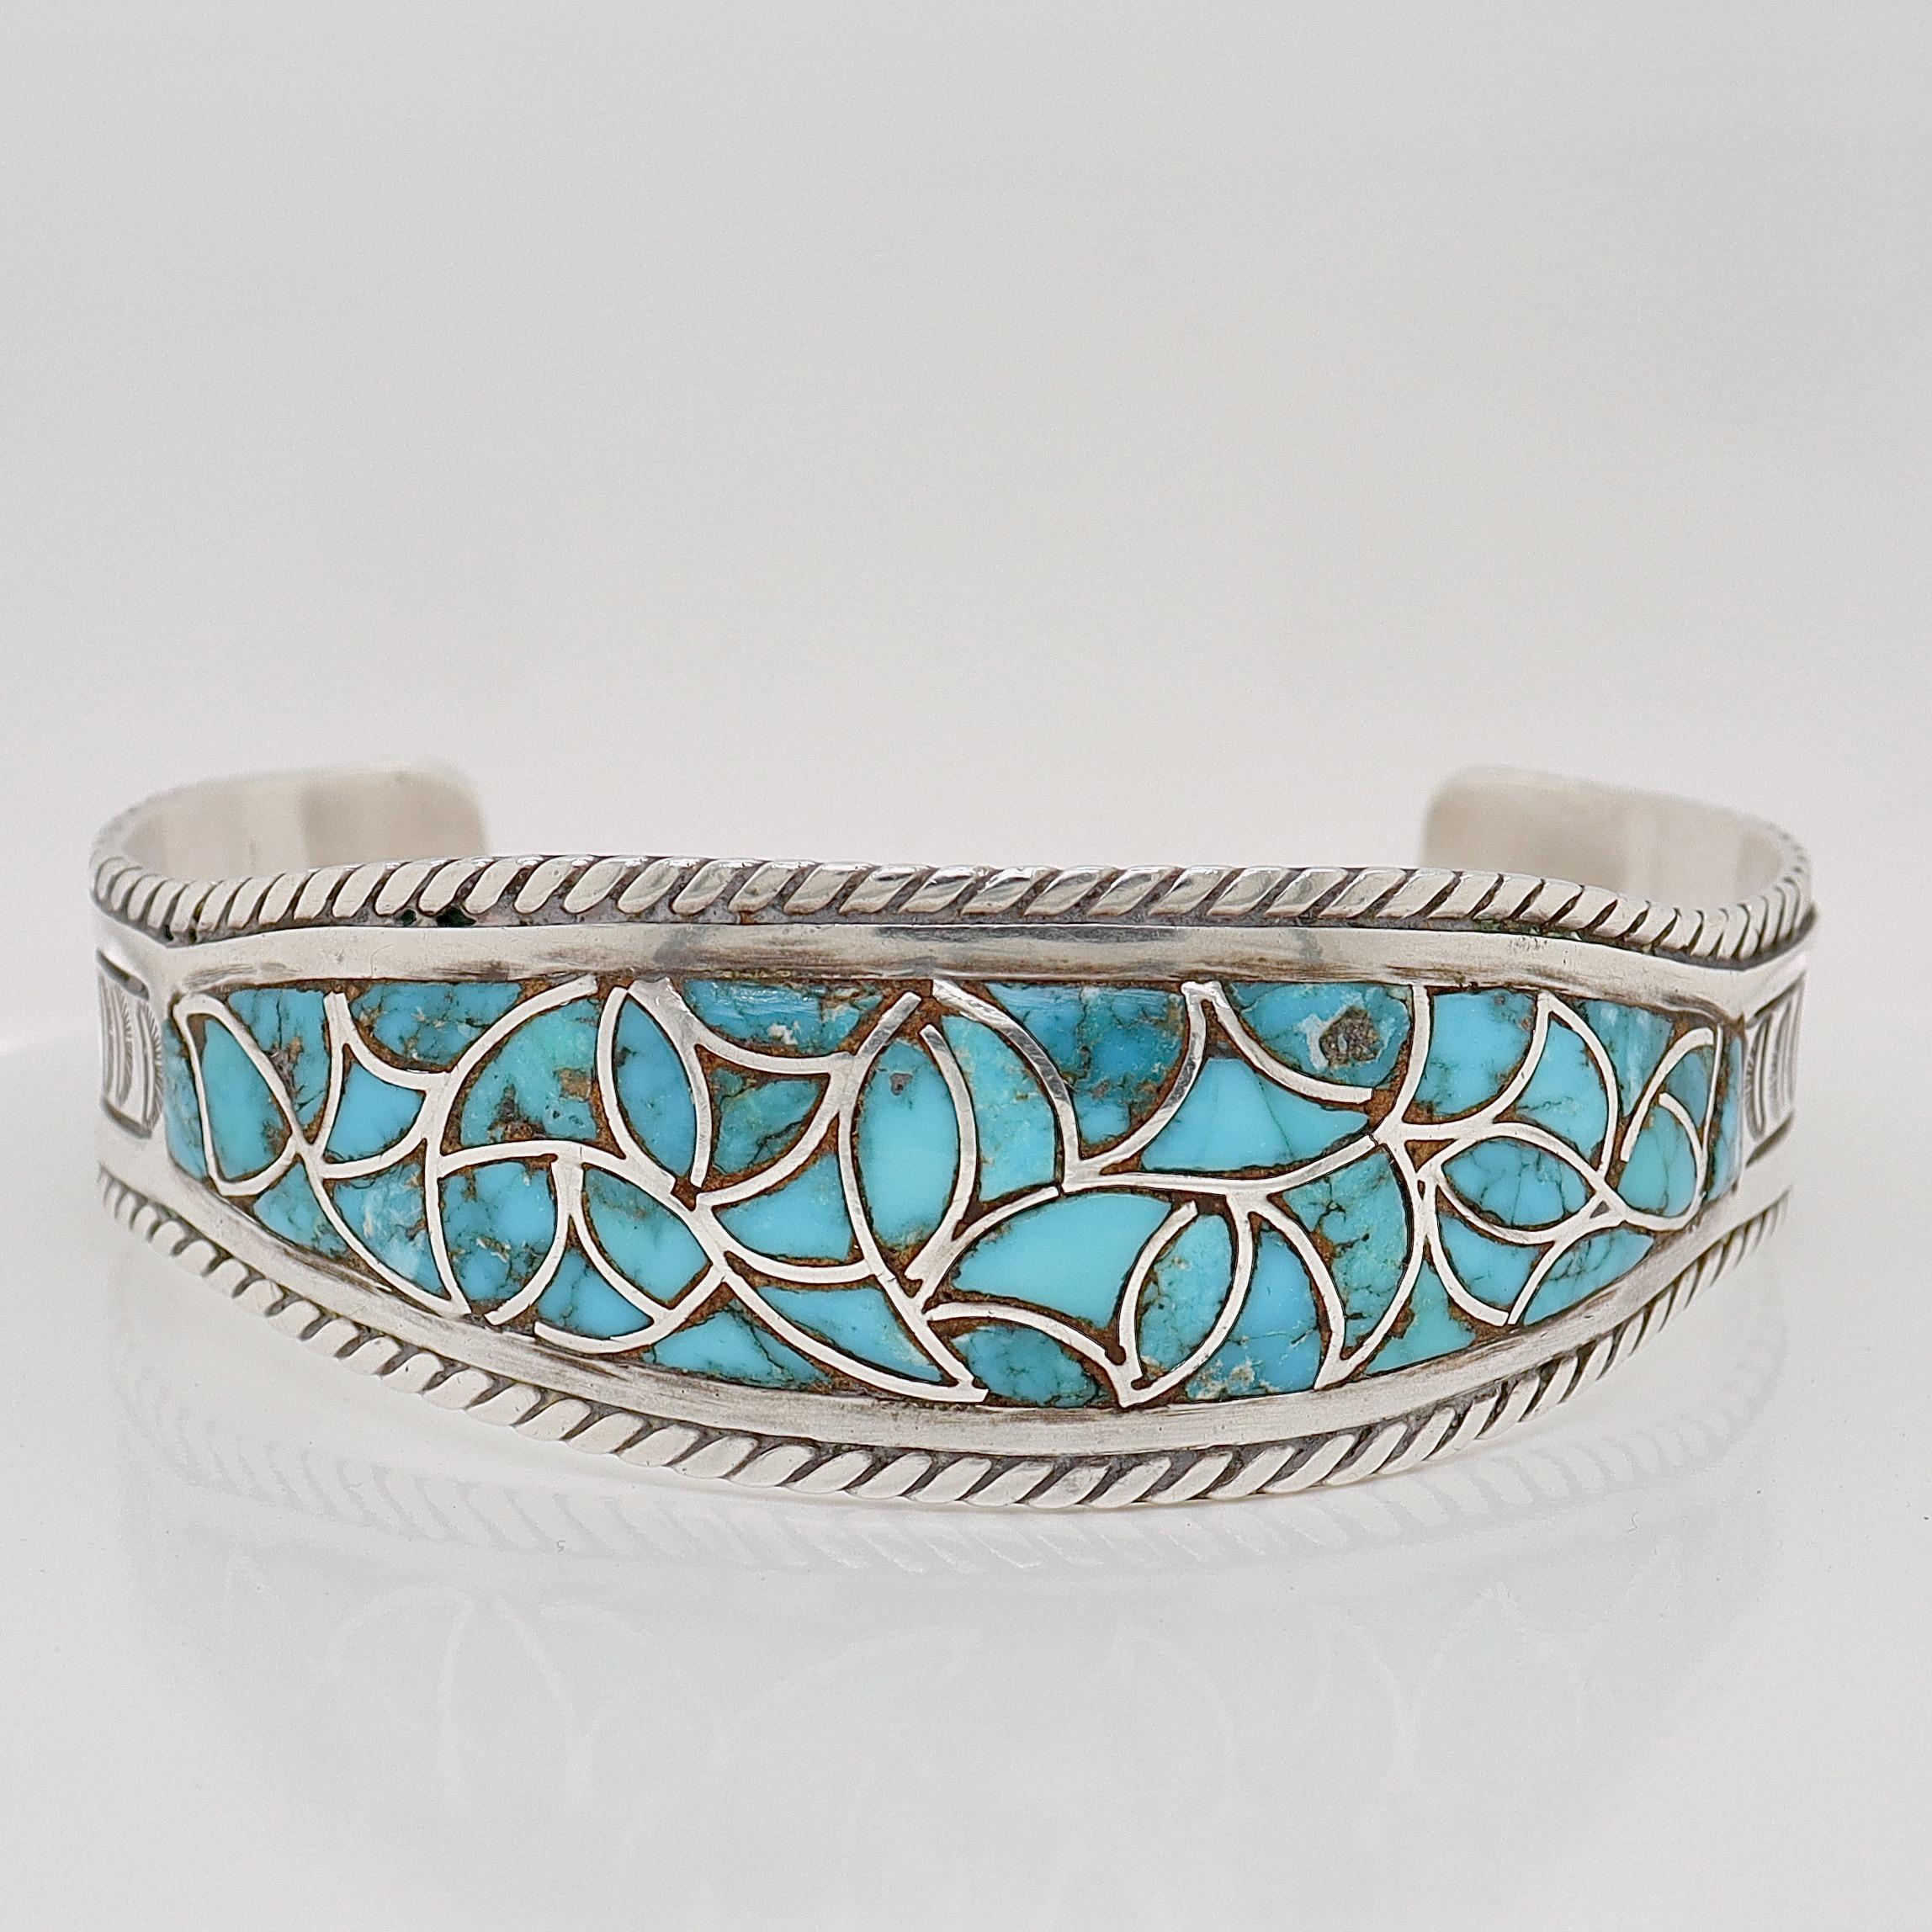 Native American Vintage Old Pawn Navajo Silver & Turquoise Cuff Bracelet For Sale